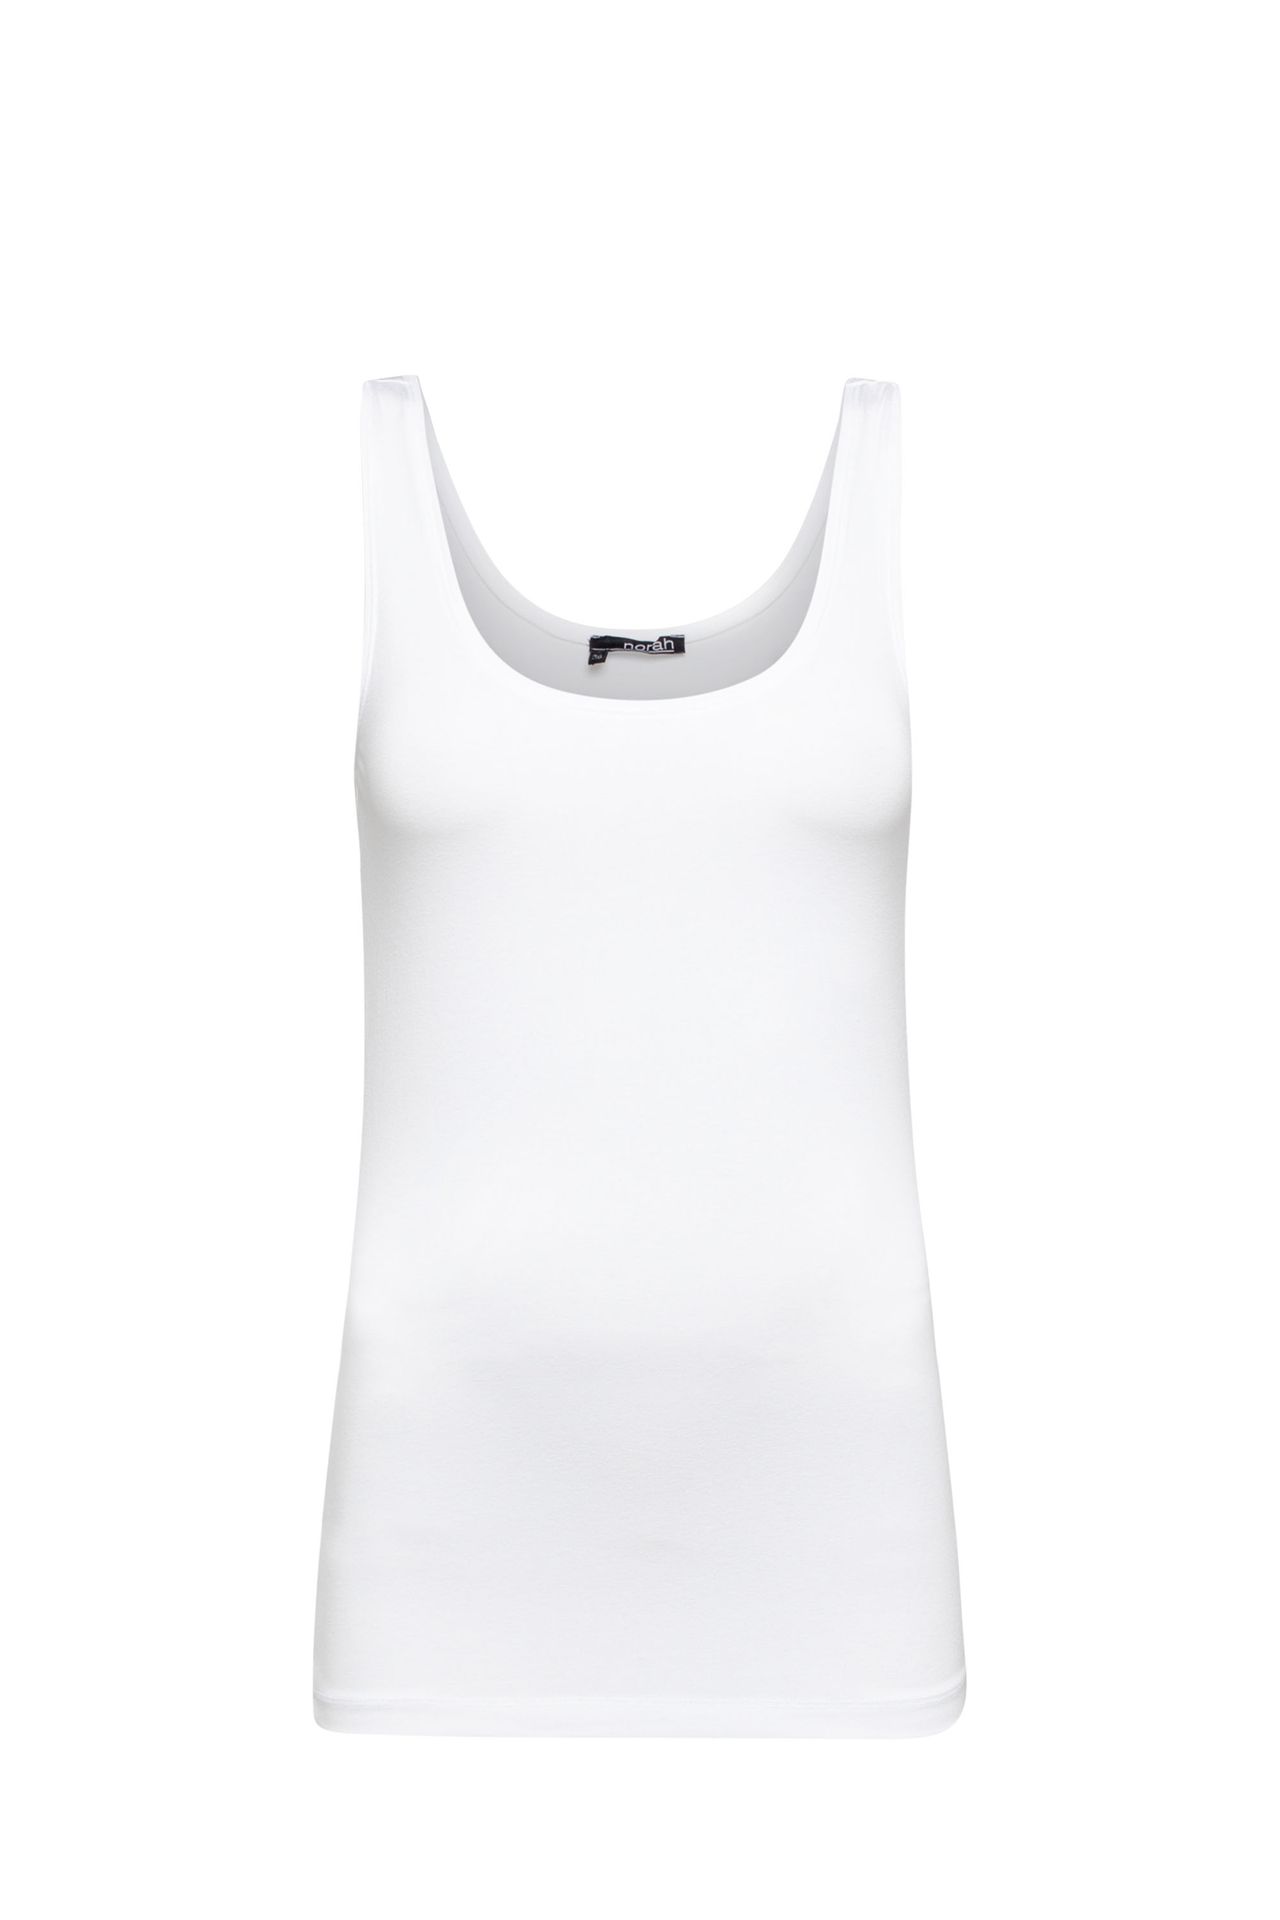 Norah Top Marianne wit white 212247-100